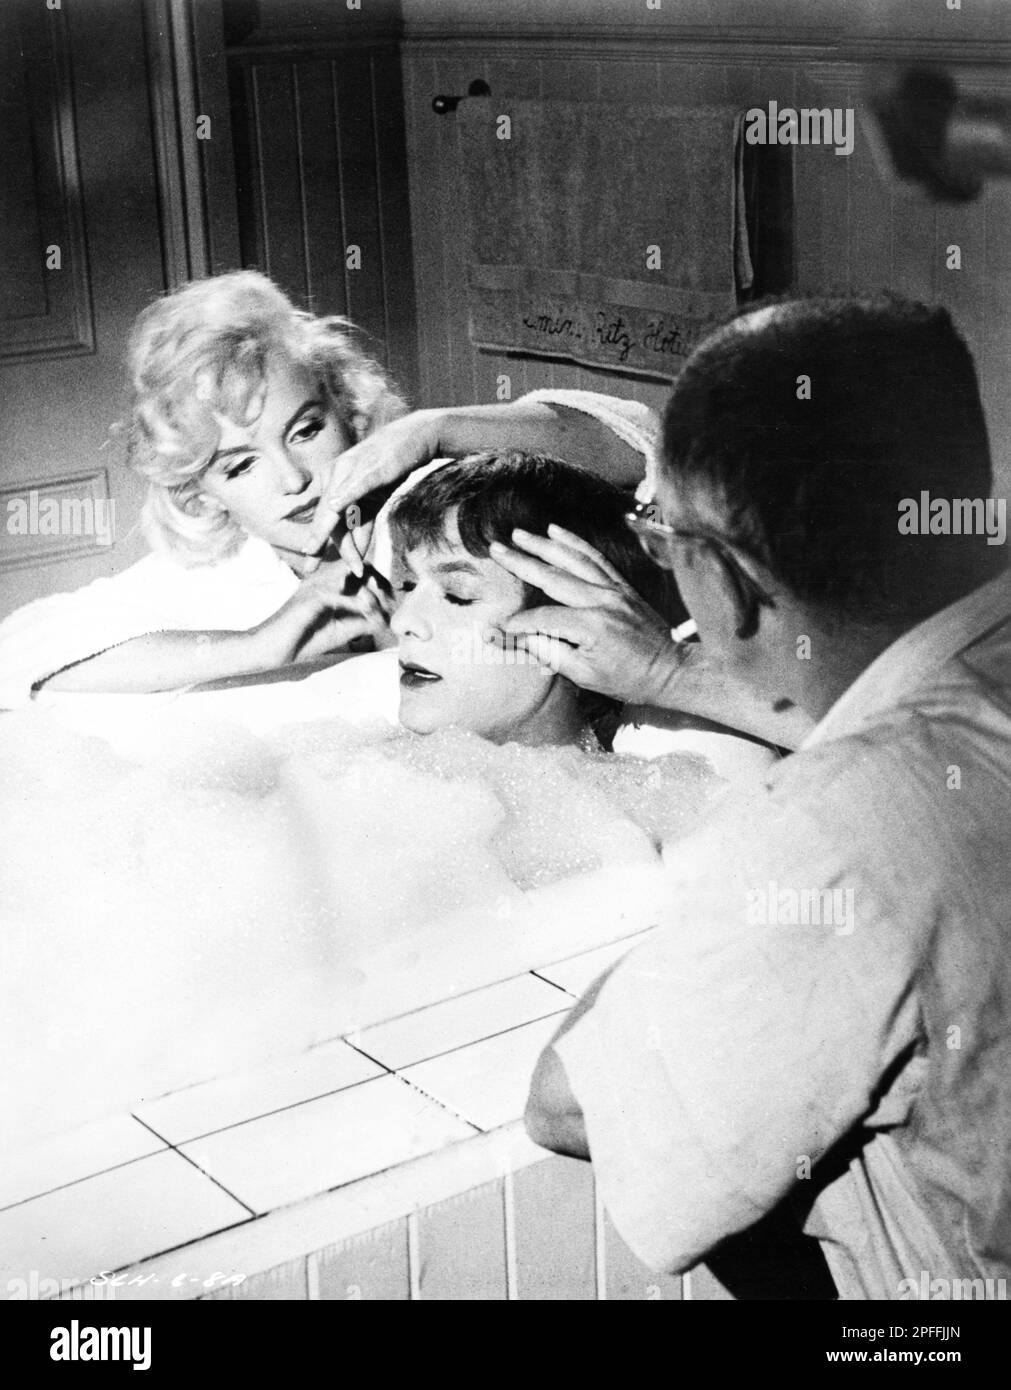 MARILYN MONROE TONY CURTIS and Director BILLY WILDER on set candid during filming of SOME LIKE IT HOT 1959 director BILLY WILDER screenplay Billy Wilder and I.A.L. Diamond Ashton Productions / The Mirisch Corporation / United Artists Stock Photo